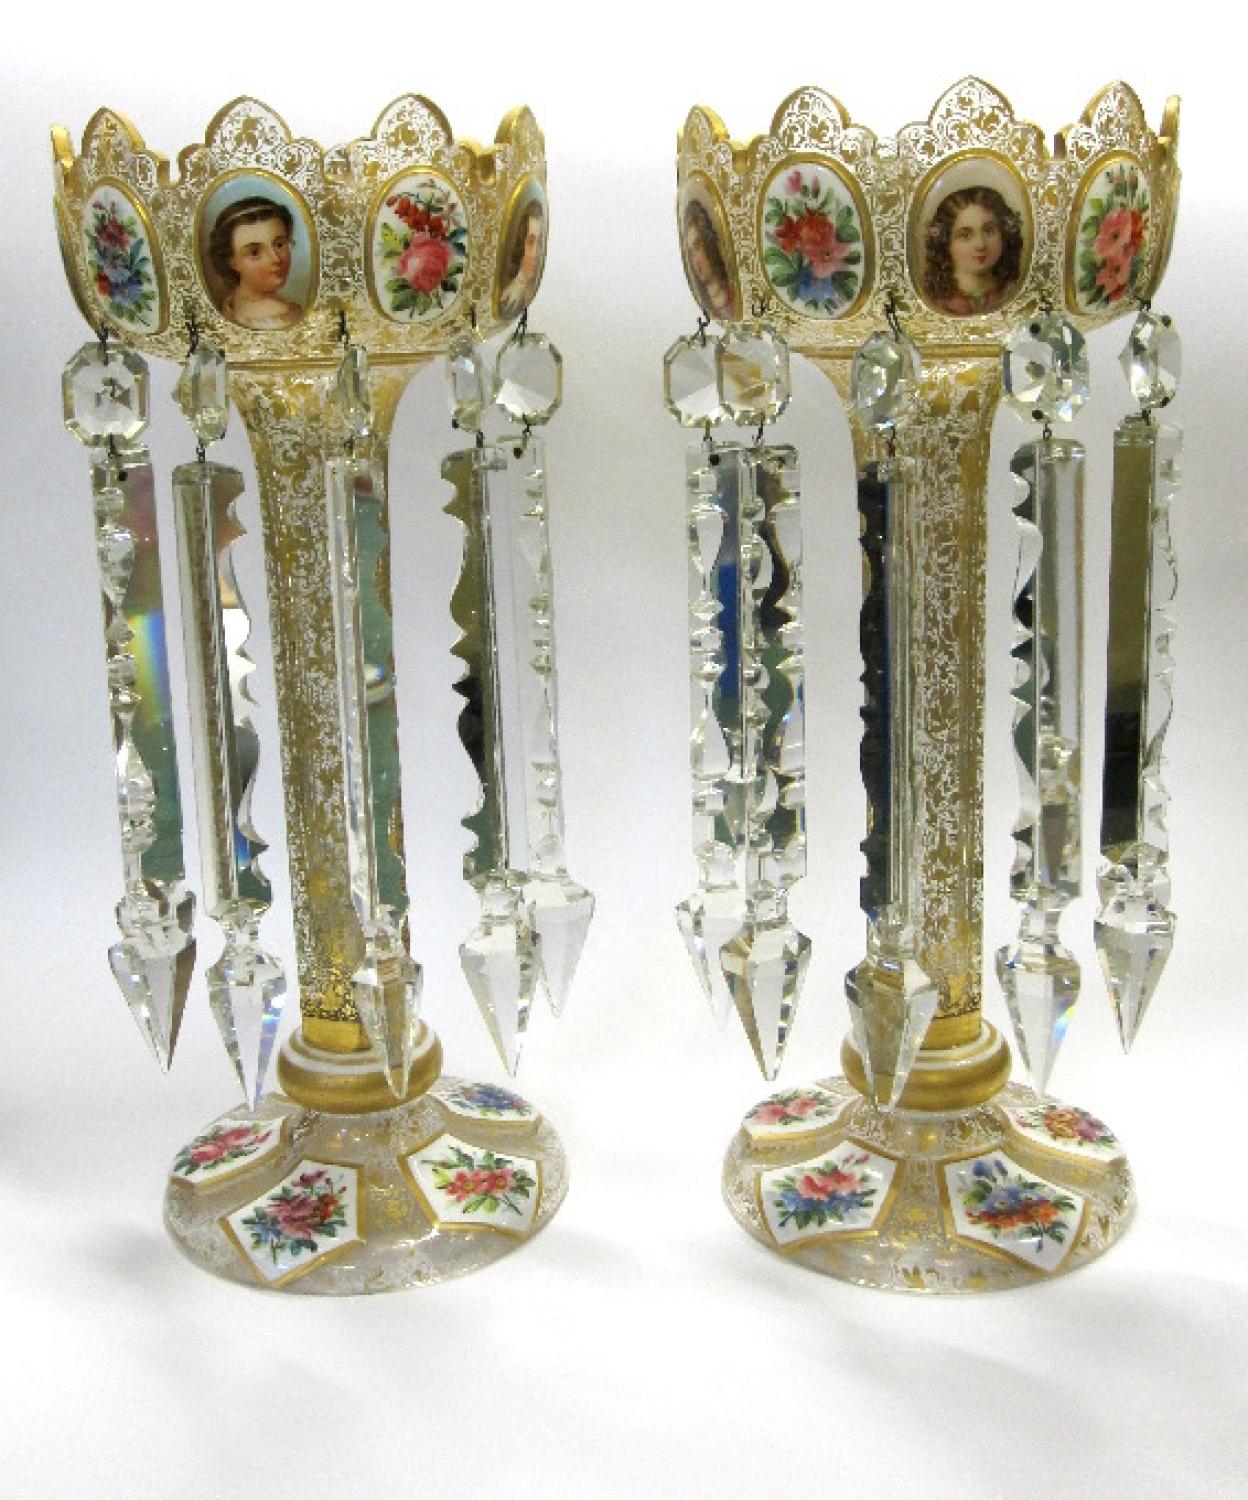 A Stunning Tall Pair of Antique Glass Lustres